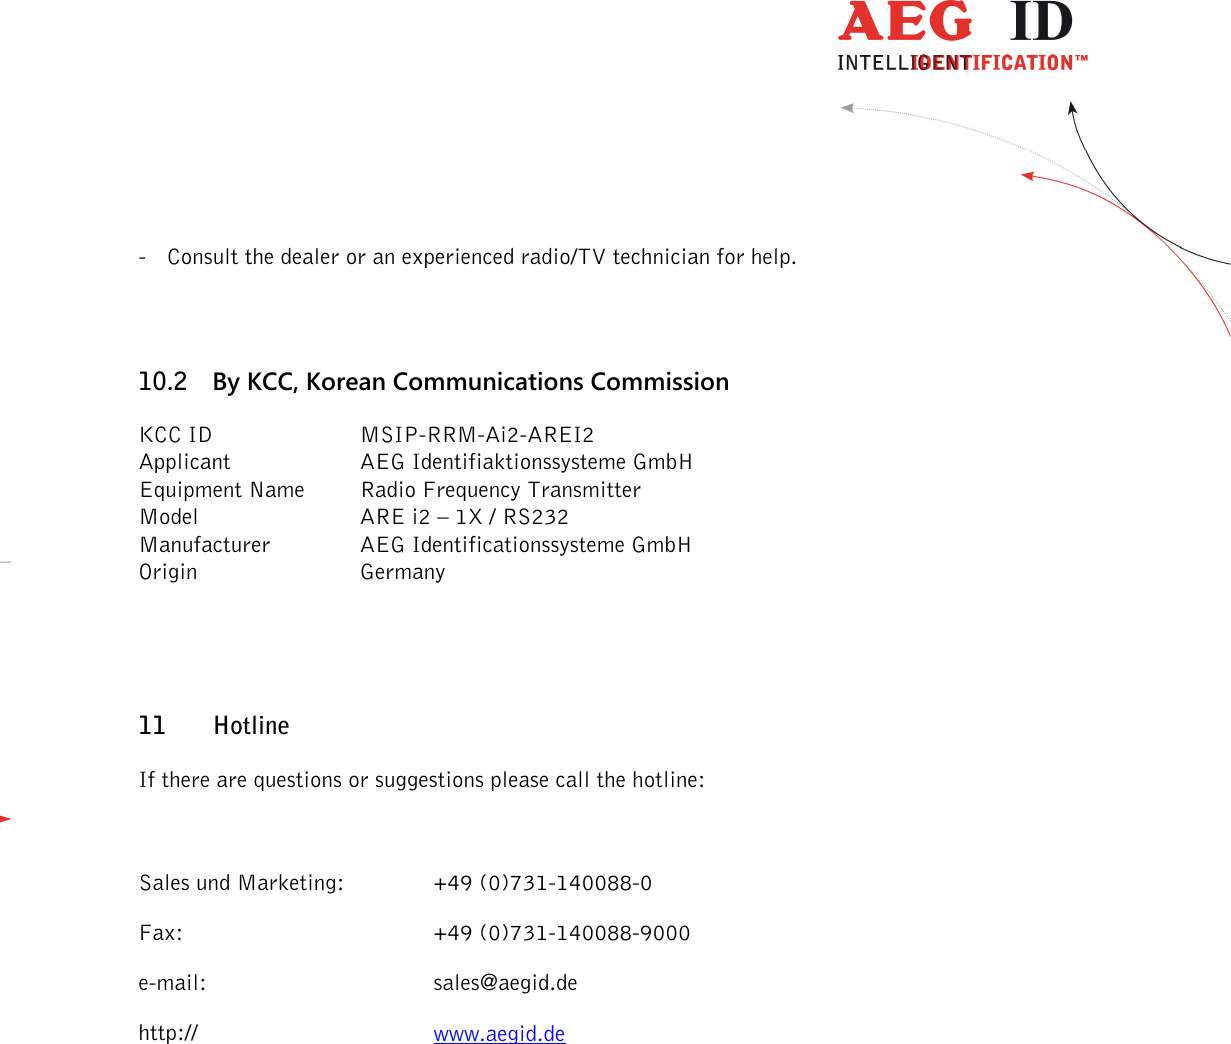                  --------------------------------------------------------------------------------31/32--------------------------------------------------------------------------------  - Consult the dealer or an experienced radio/TV technician for help. 10.2 By KCC, Korean Communications Commission KCC ID    MSIP-RRM-Ai2-AREI2 Applicant    AEG Identifiaktionssysteme GmbH Equipment Name  Radio Frequency Transmitter Model      ARE i2 – 1X / RS232 Manufacturer    AEG Identificationssysteme GmbH Origin      Germany  11 Hotline If there are questions or suggestions please call the hotline:  Sales und Marketing:     +49 (0)731-140088-0 Fax:        +49 (0)731-140088-9000 e-mail:       sales@aegid.de http://        www.aegid.de 